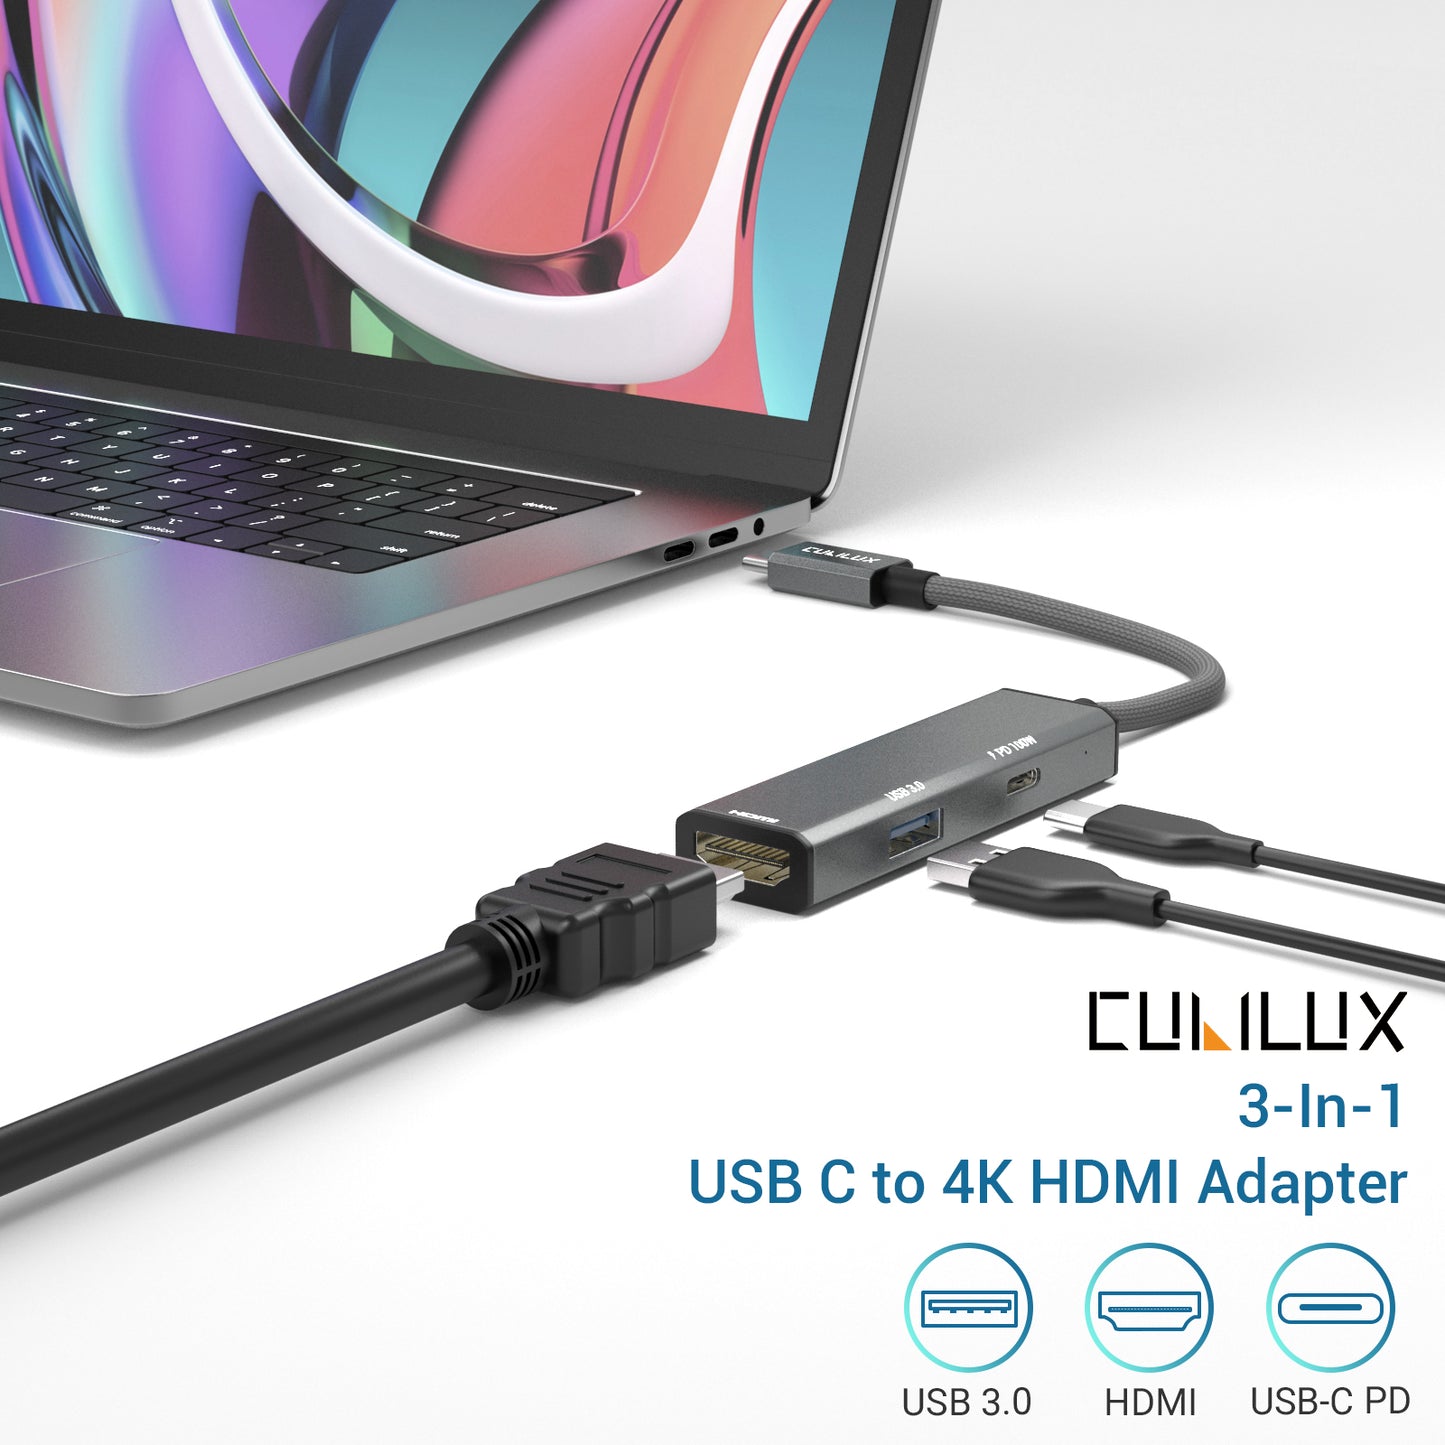 3-In-1 USB C to 4K HDMI Adapter with USB 3.0